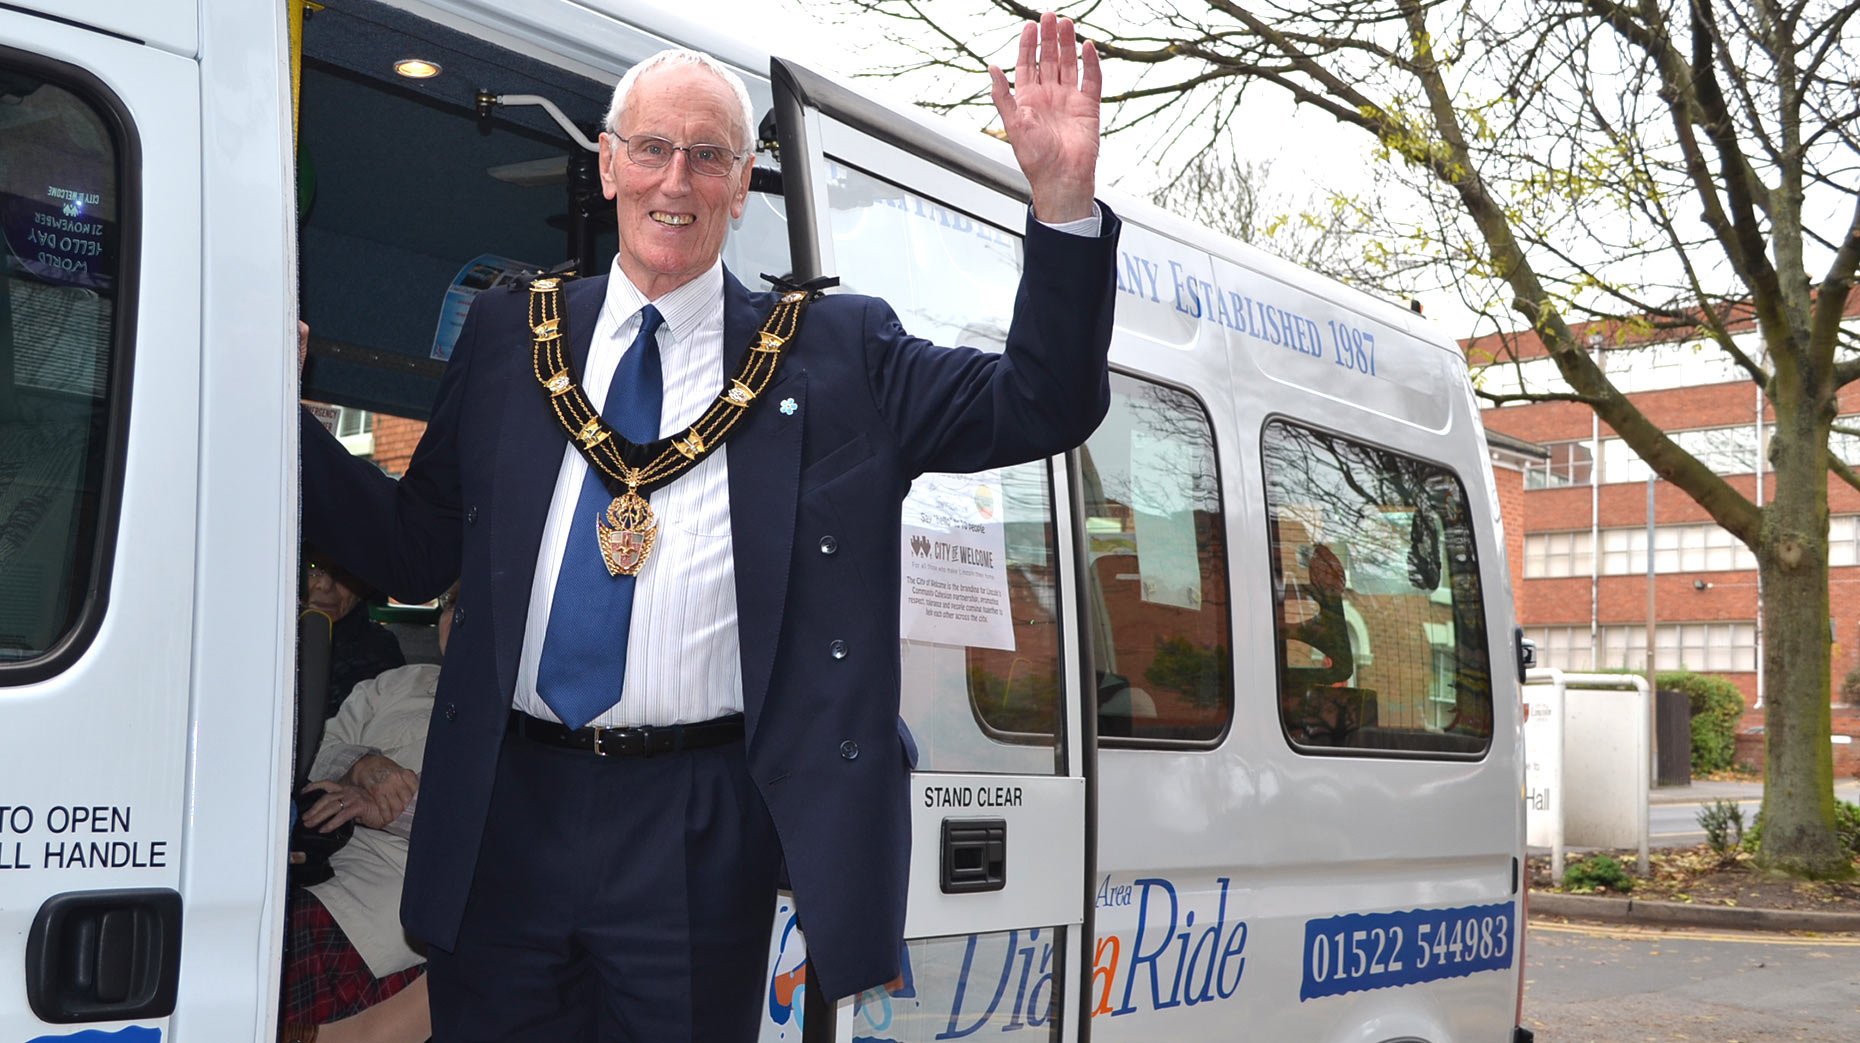 Mayor of Lincoln Councillor Brent Charlesworth chose Dial-a-Ride and Age UK as his charities of the year. Photo: Emily Norton